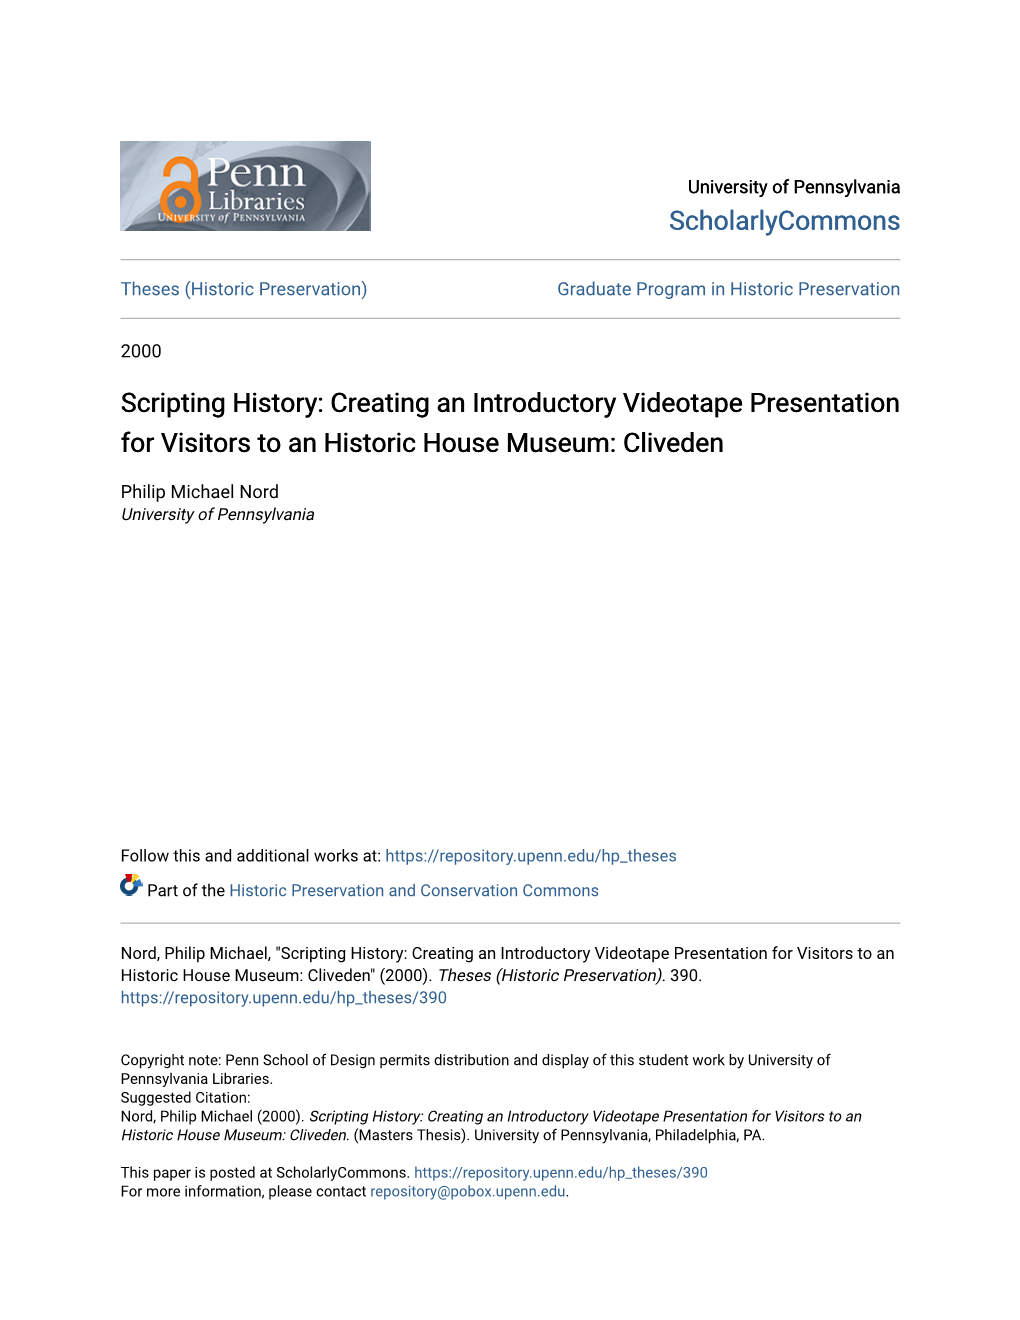 Scripting History: Creating an Introductory Videotape Presentation for Visitors to an Historic House Museum: Cliveden